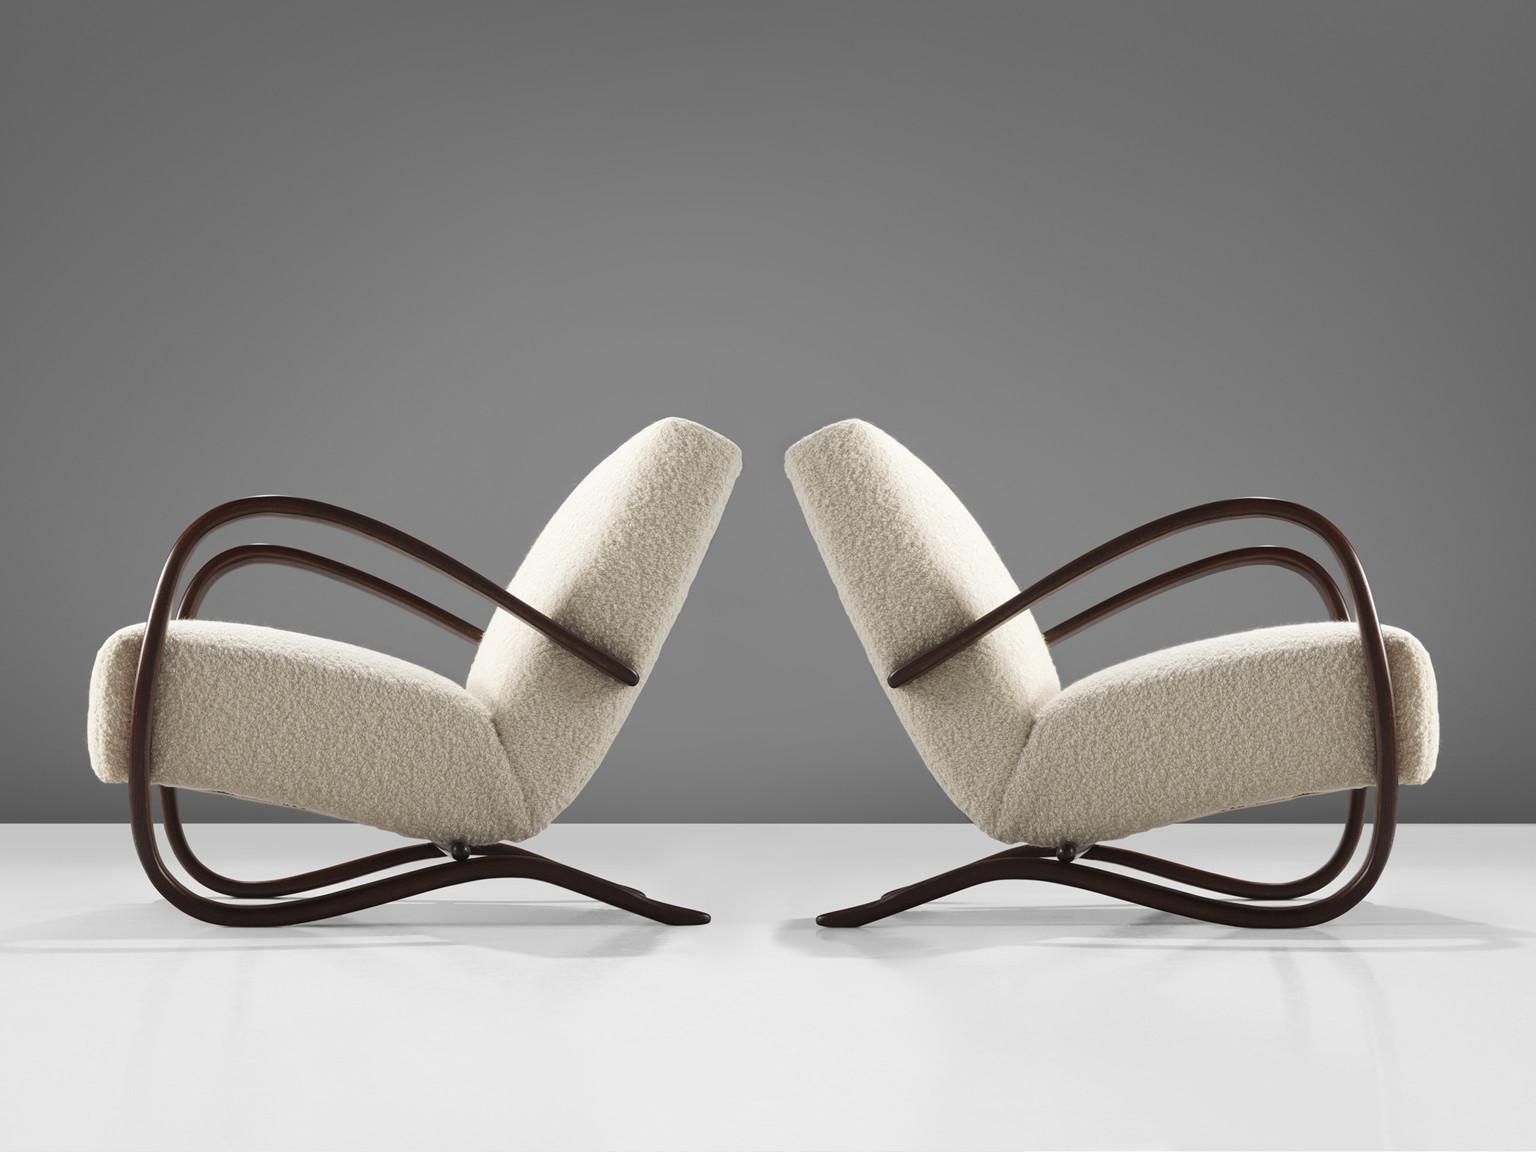 Jindrich Halabala, lounge chairs, model 'H269', stained beech, Pierre Frey bouclé, Czech Republic, 1930s.

Extraordinary easy chairs upholstered in a fine off-white bouclé by Pierre Frey. These armchairs have a very dynamic and abundant appearance